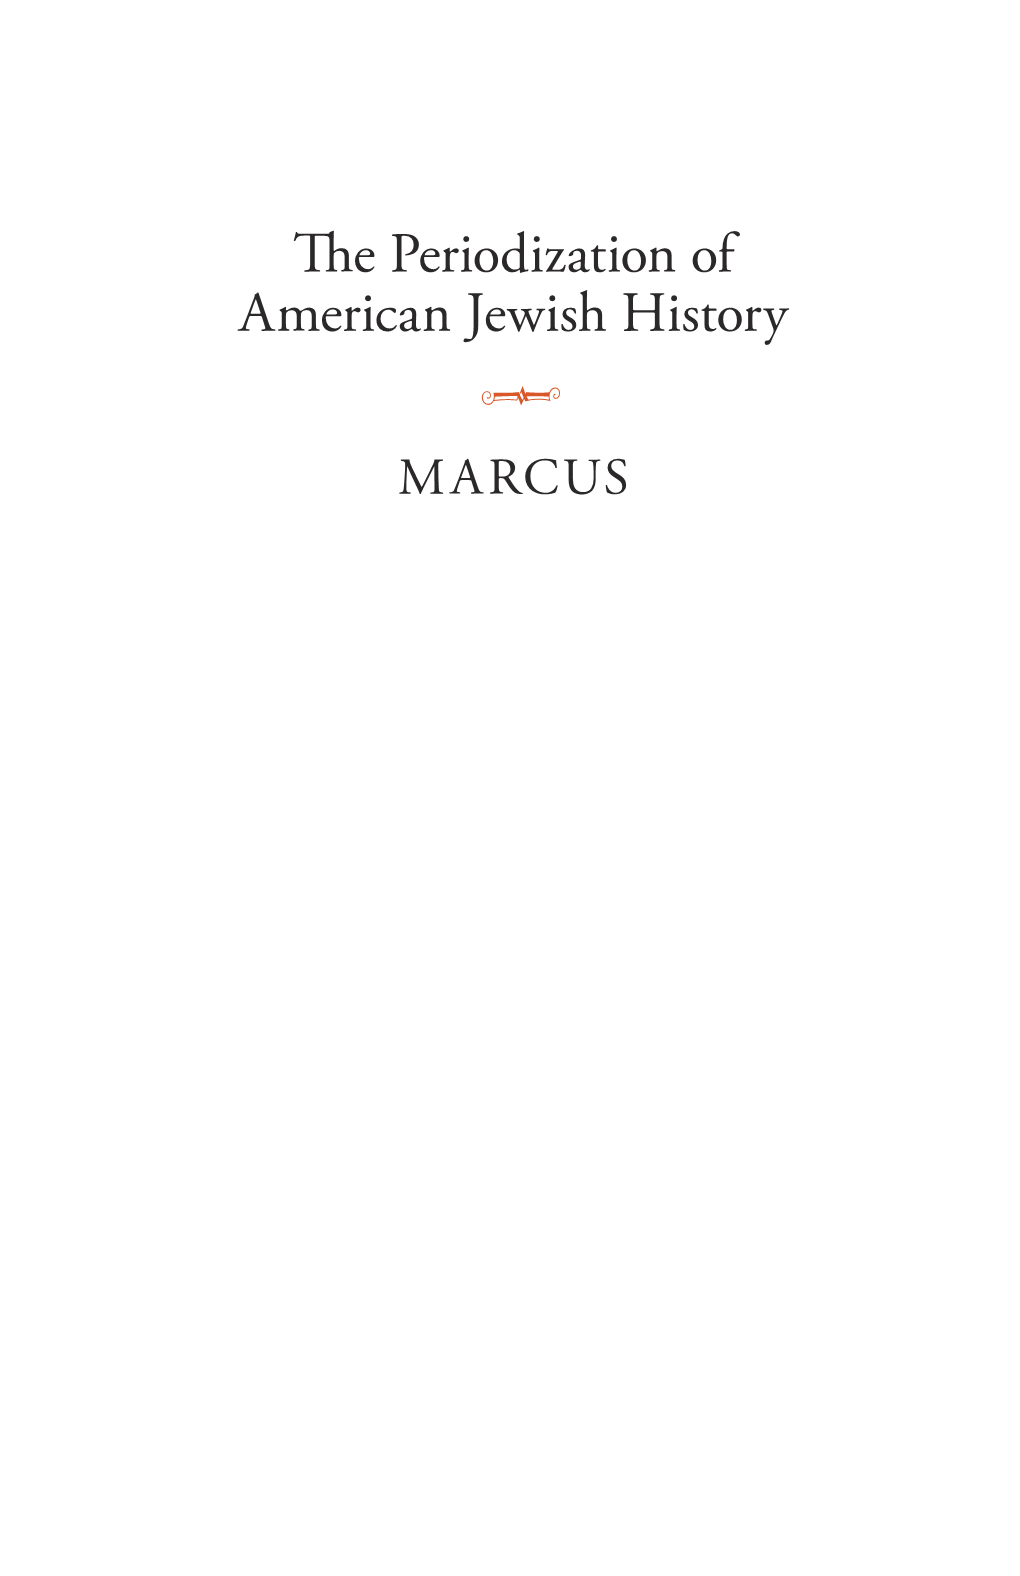 The Periodization of American Jewish History by Jacob Rader Marcus